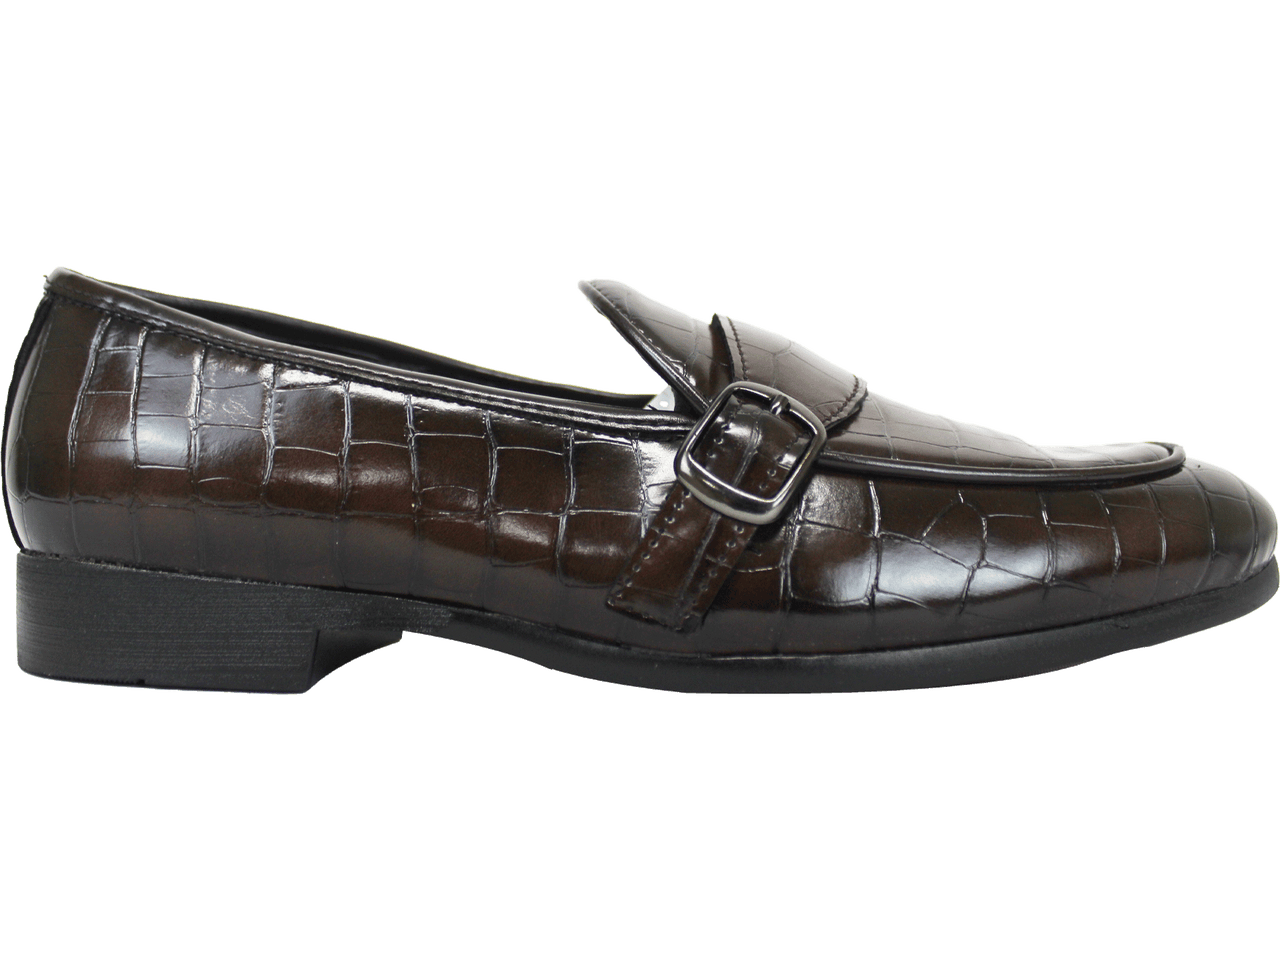 P CROUCH & CO Choc Croc Side Buckle